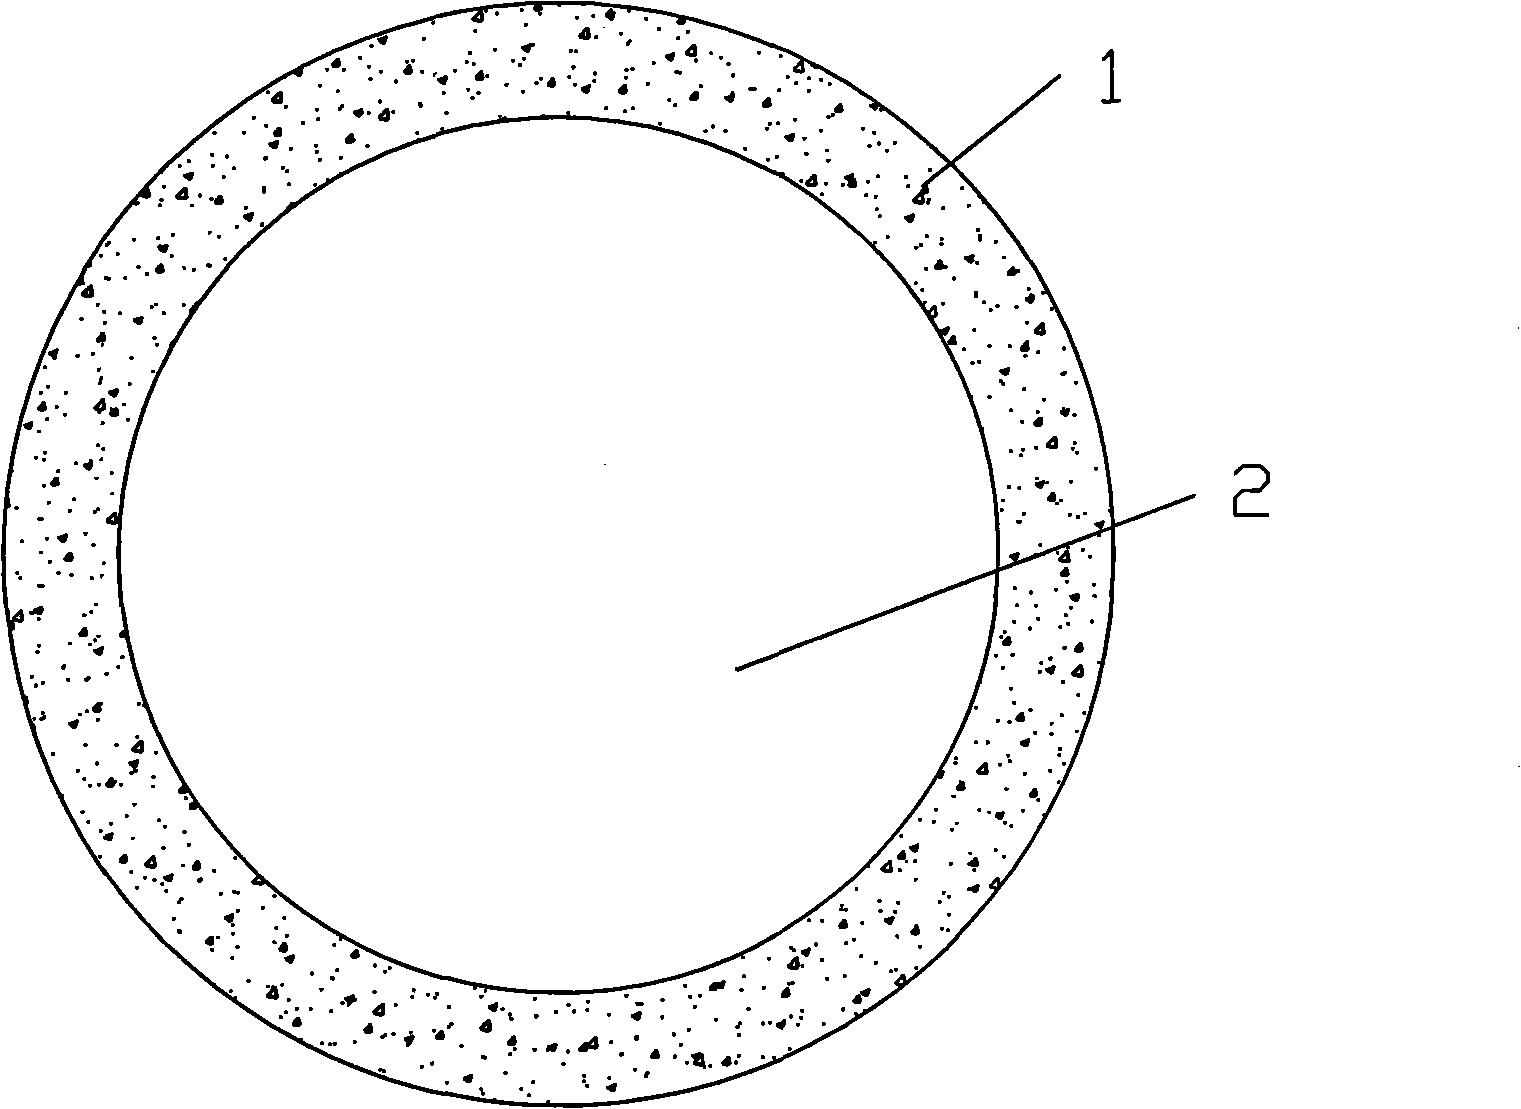 Method for producing diamond saw bit special for glass-cutting